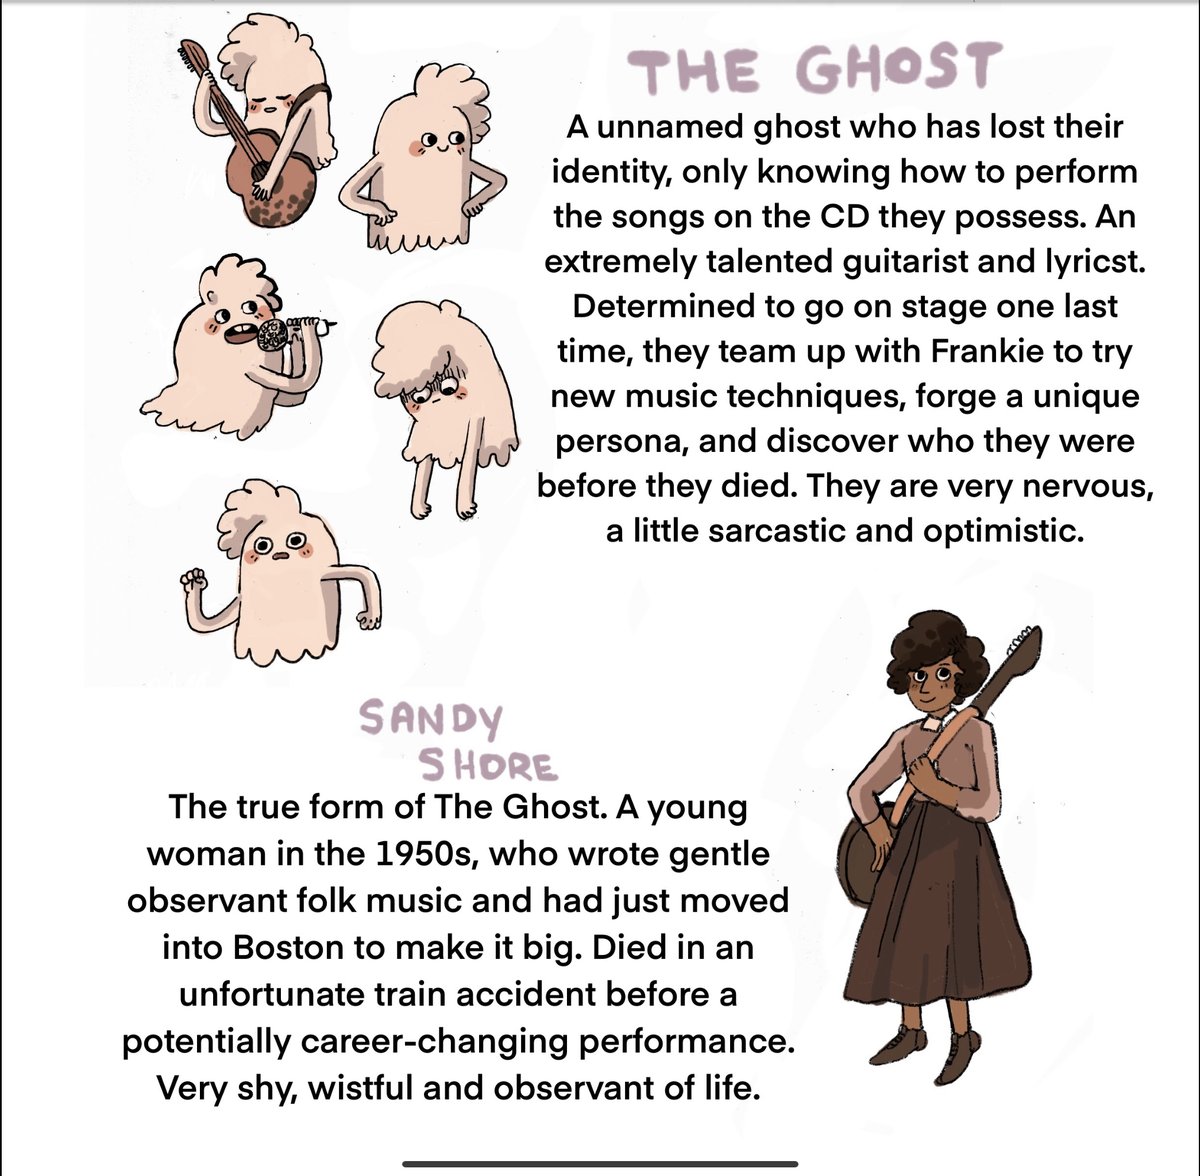 Some more stuff from my shelved GN pitch! It was about a girl who found a ghost in an old record. It turns out it was too similar to something else!! This pitch taught me so much about pitching and storytelling and it will be forever close to my heart. 